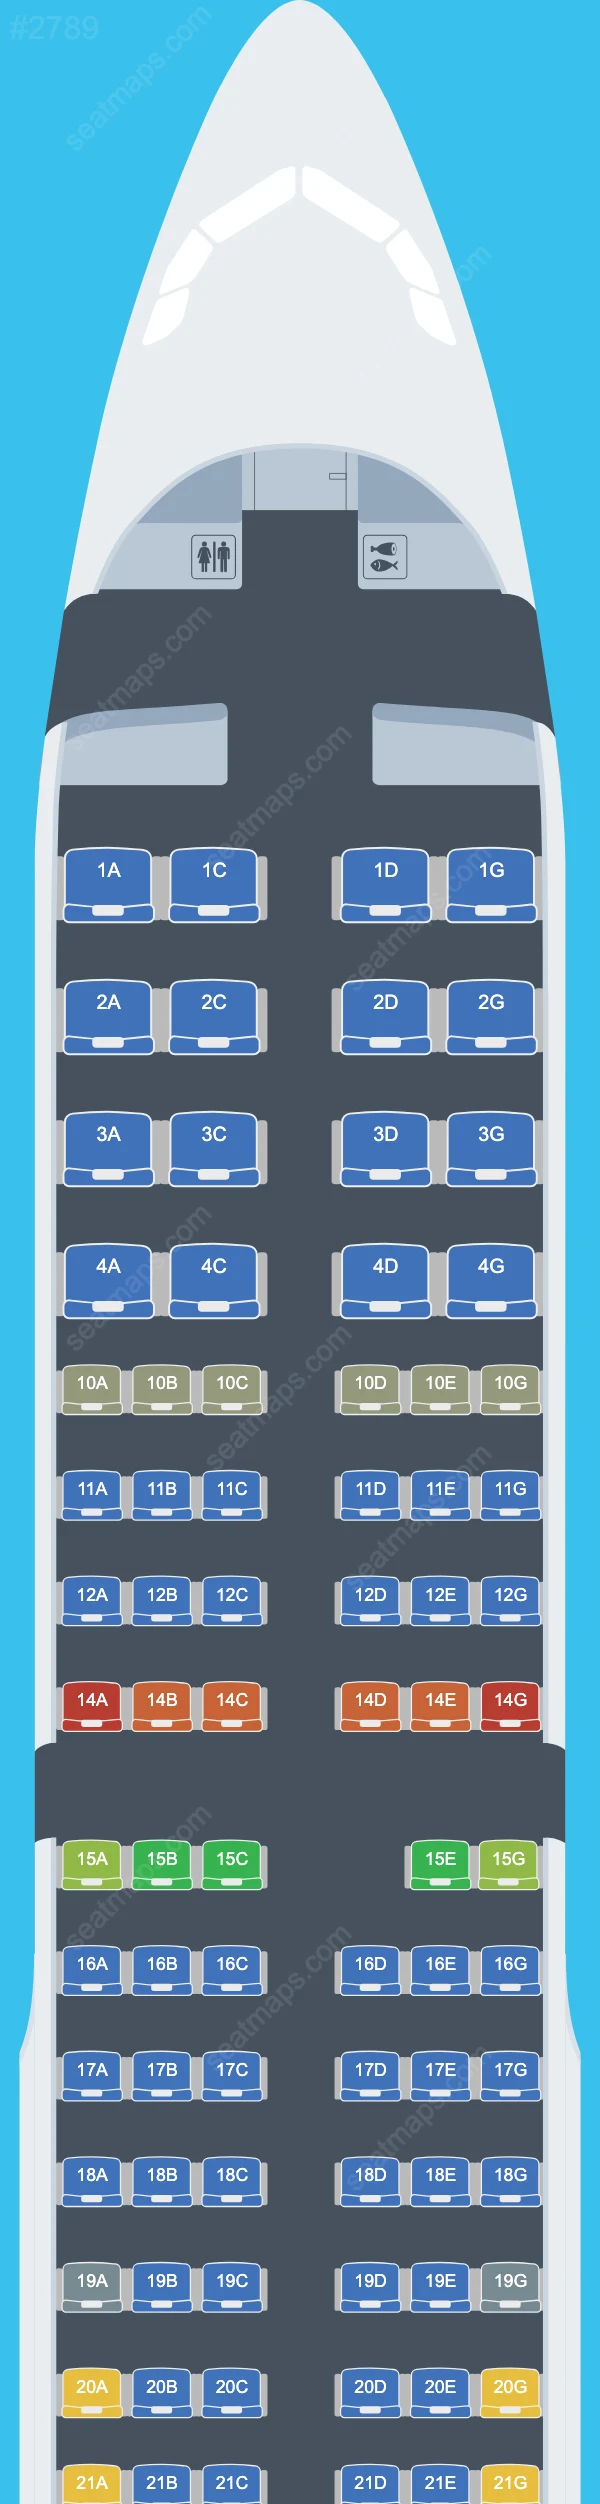 Vietnam Airlines Airbus A321 Seat Maps A321-200 V.1